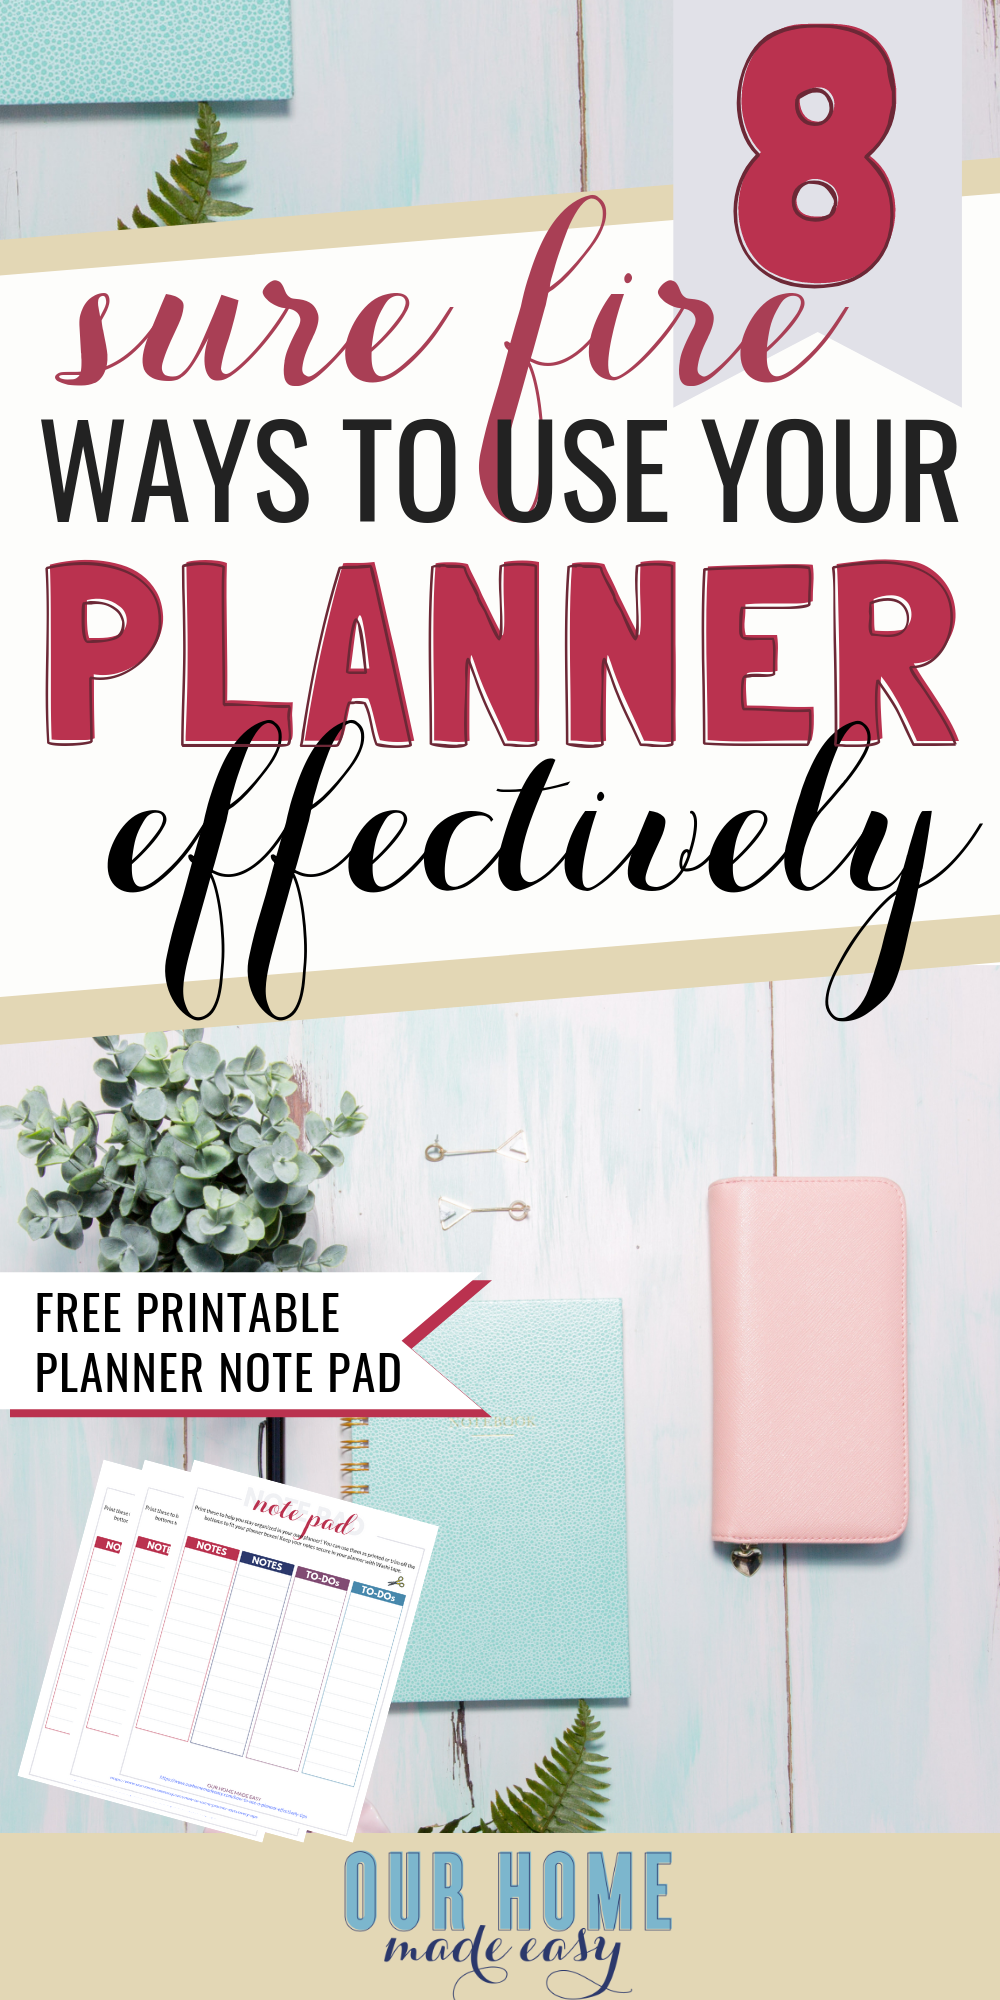 How to Use A Planner: 8 sure-fire ways to use your planner effectively, plus a free printable!